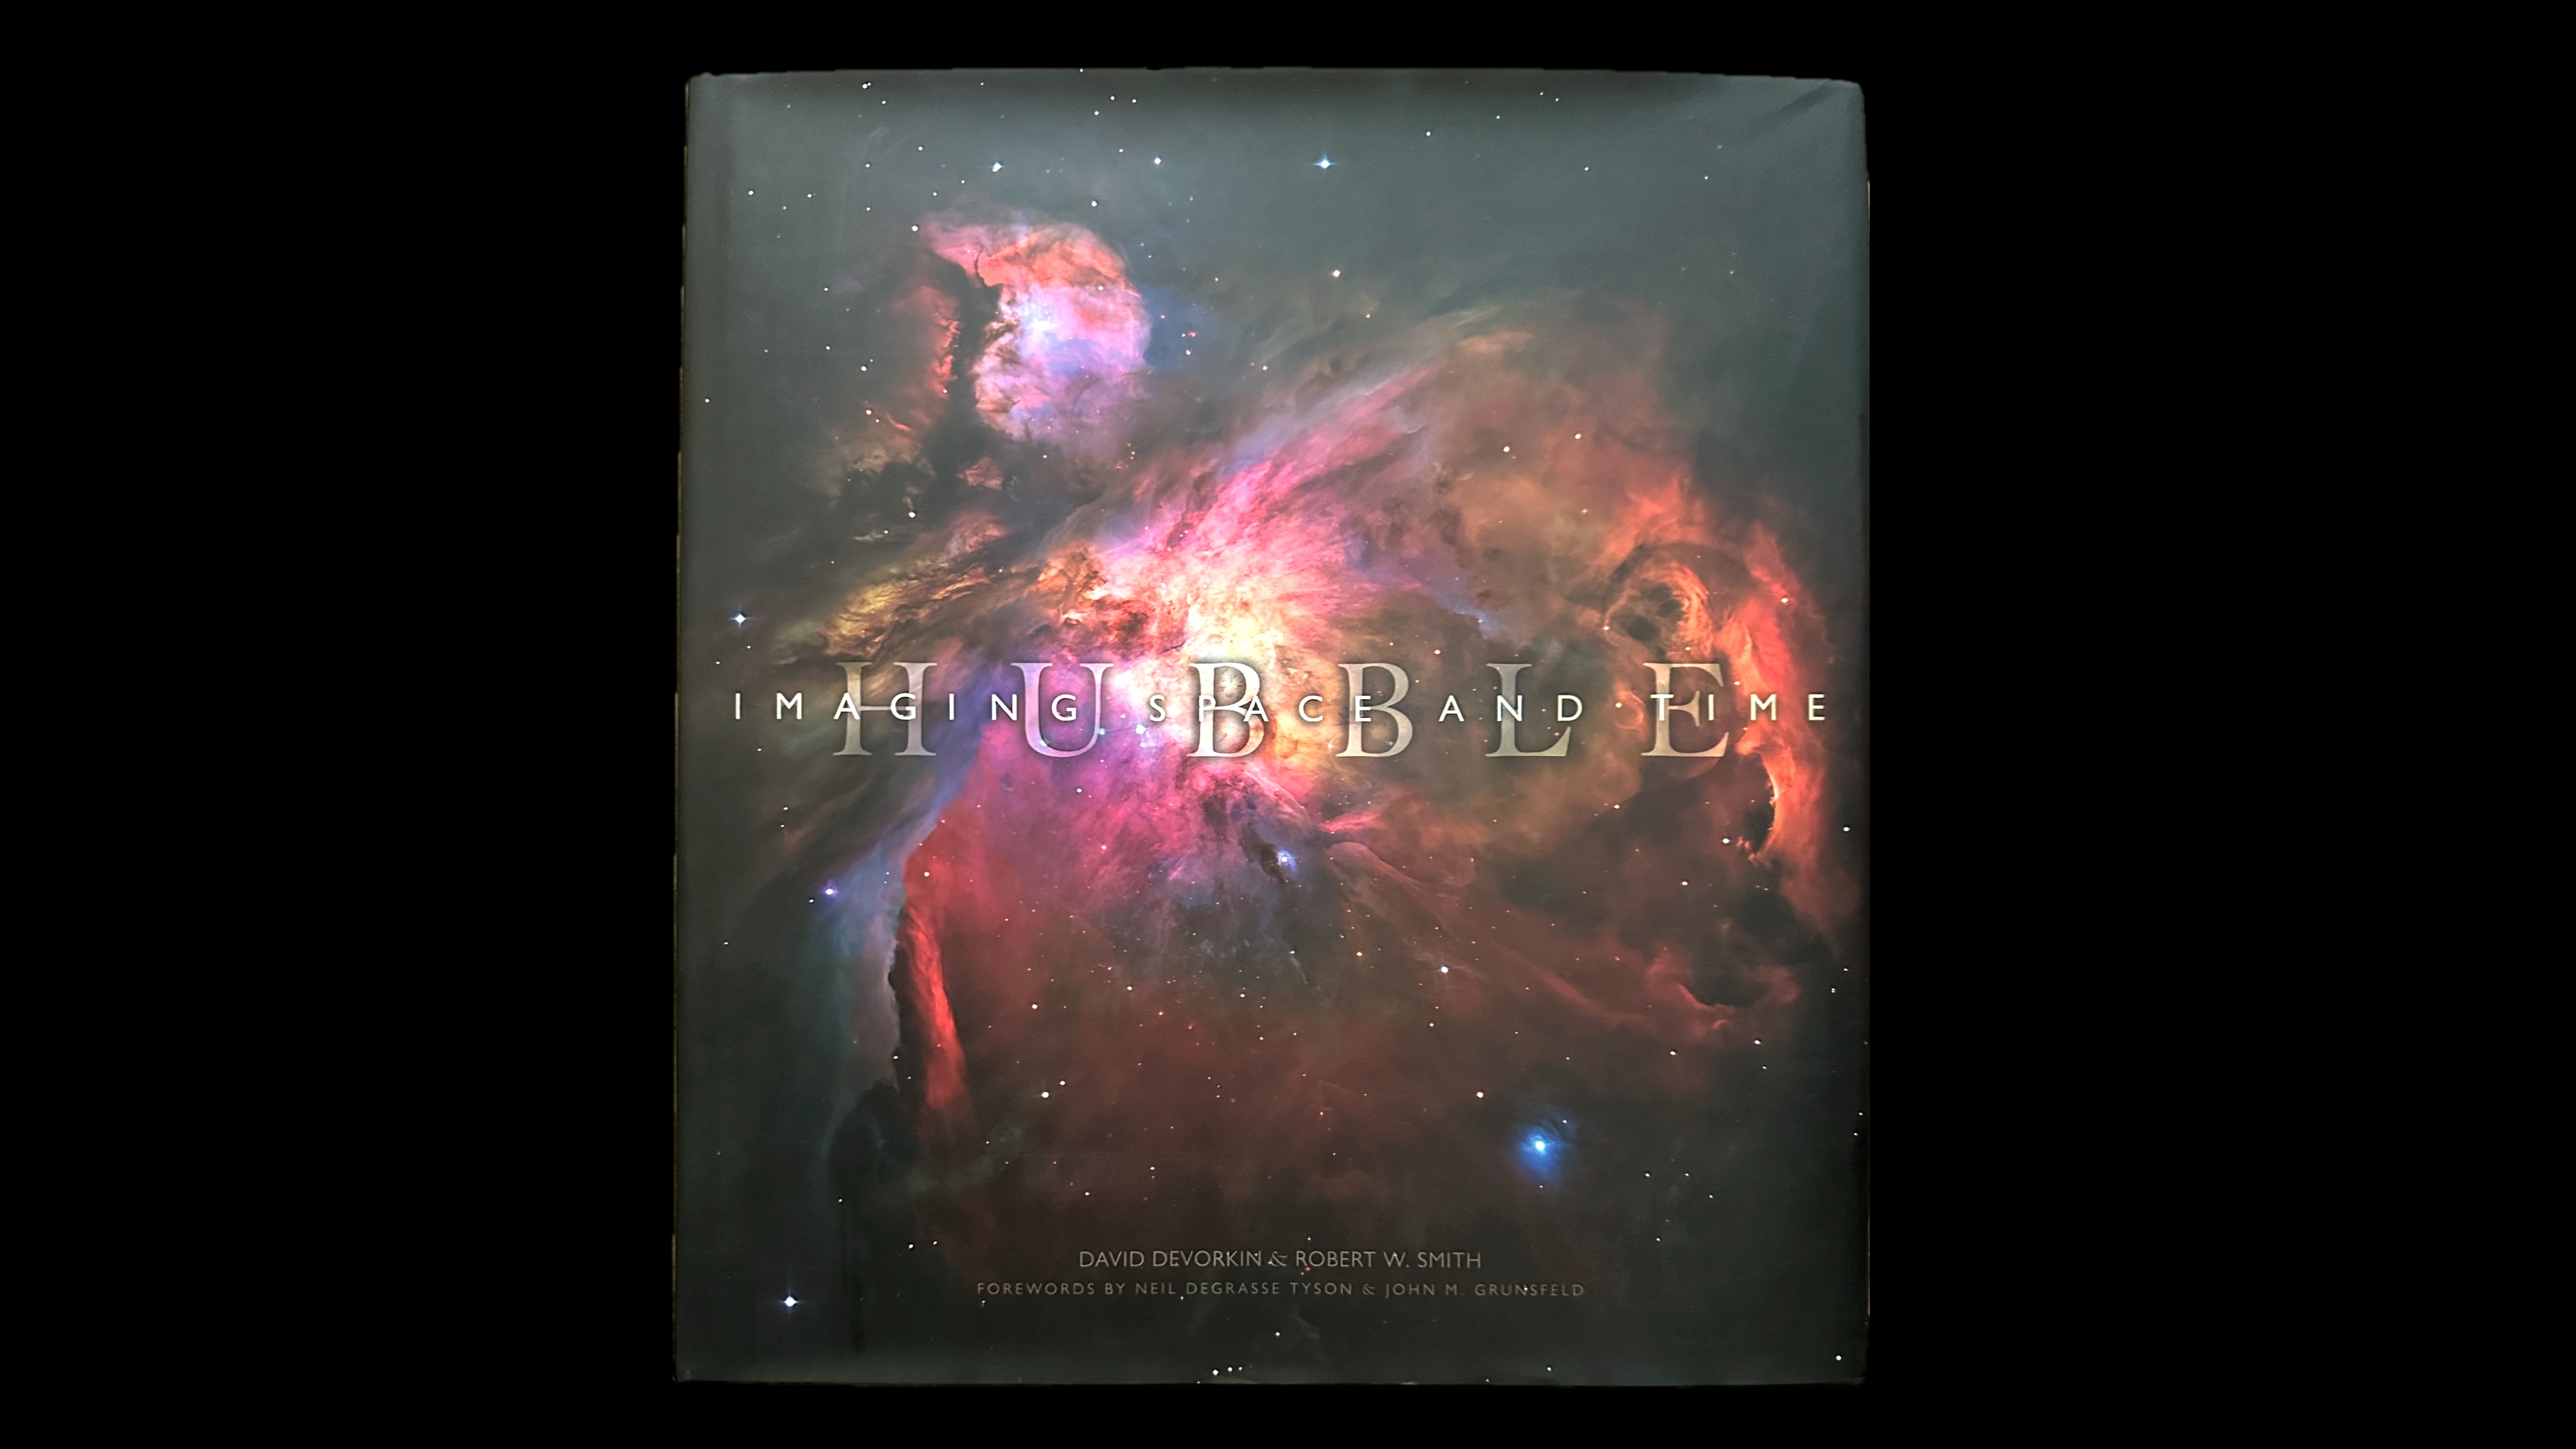 The cover of a national geographic book with Hubble's image of the Orion Nebula on it. The title reads "Hubble: Imaging Space and Time."